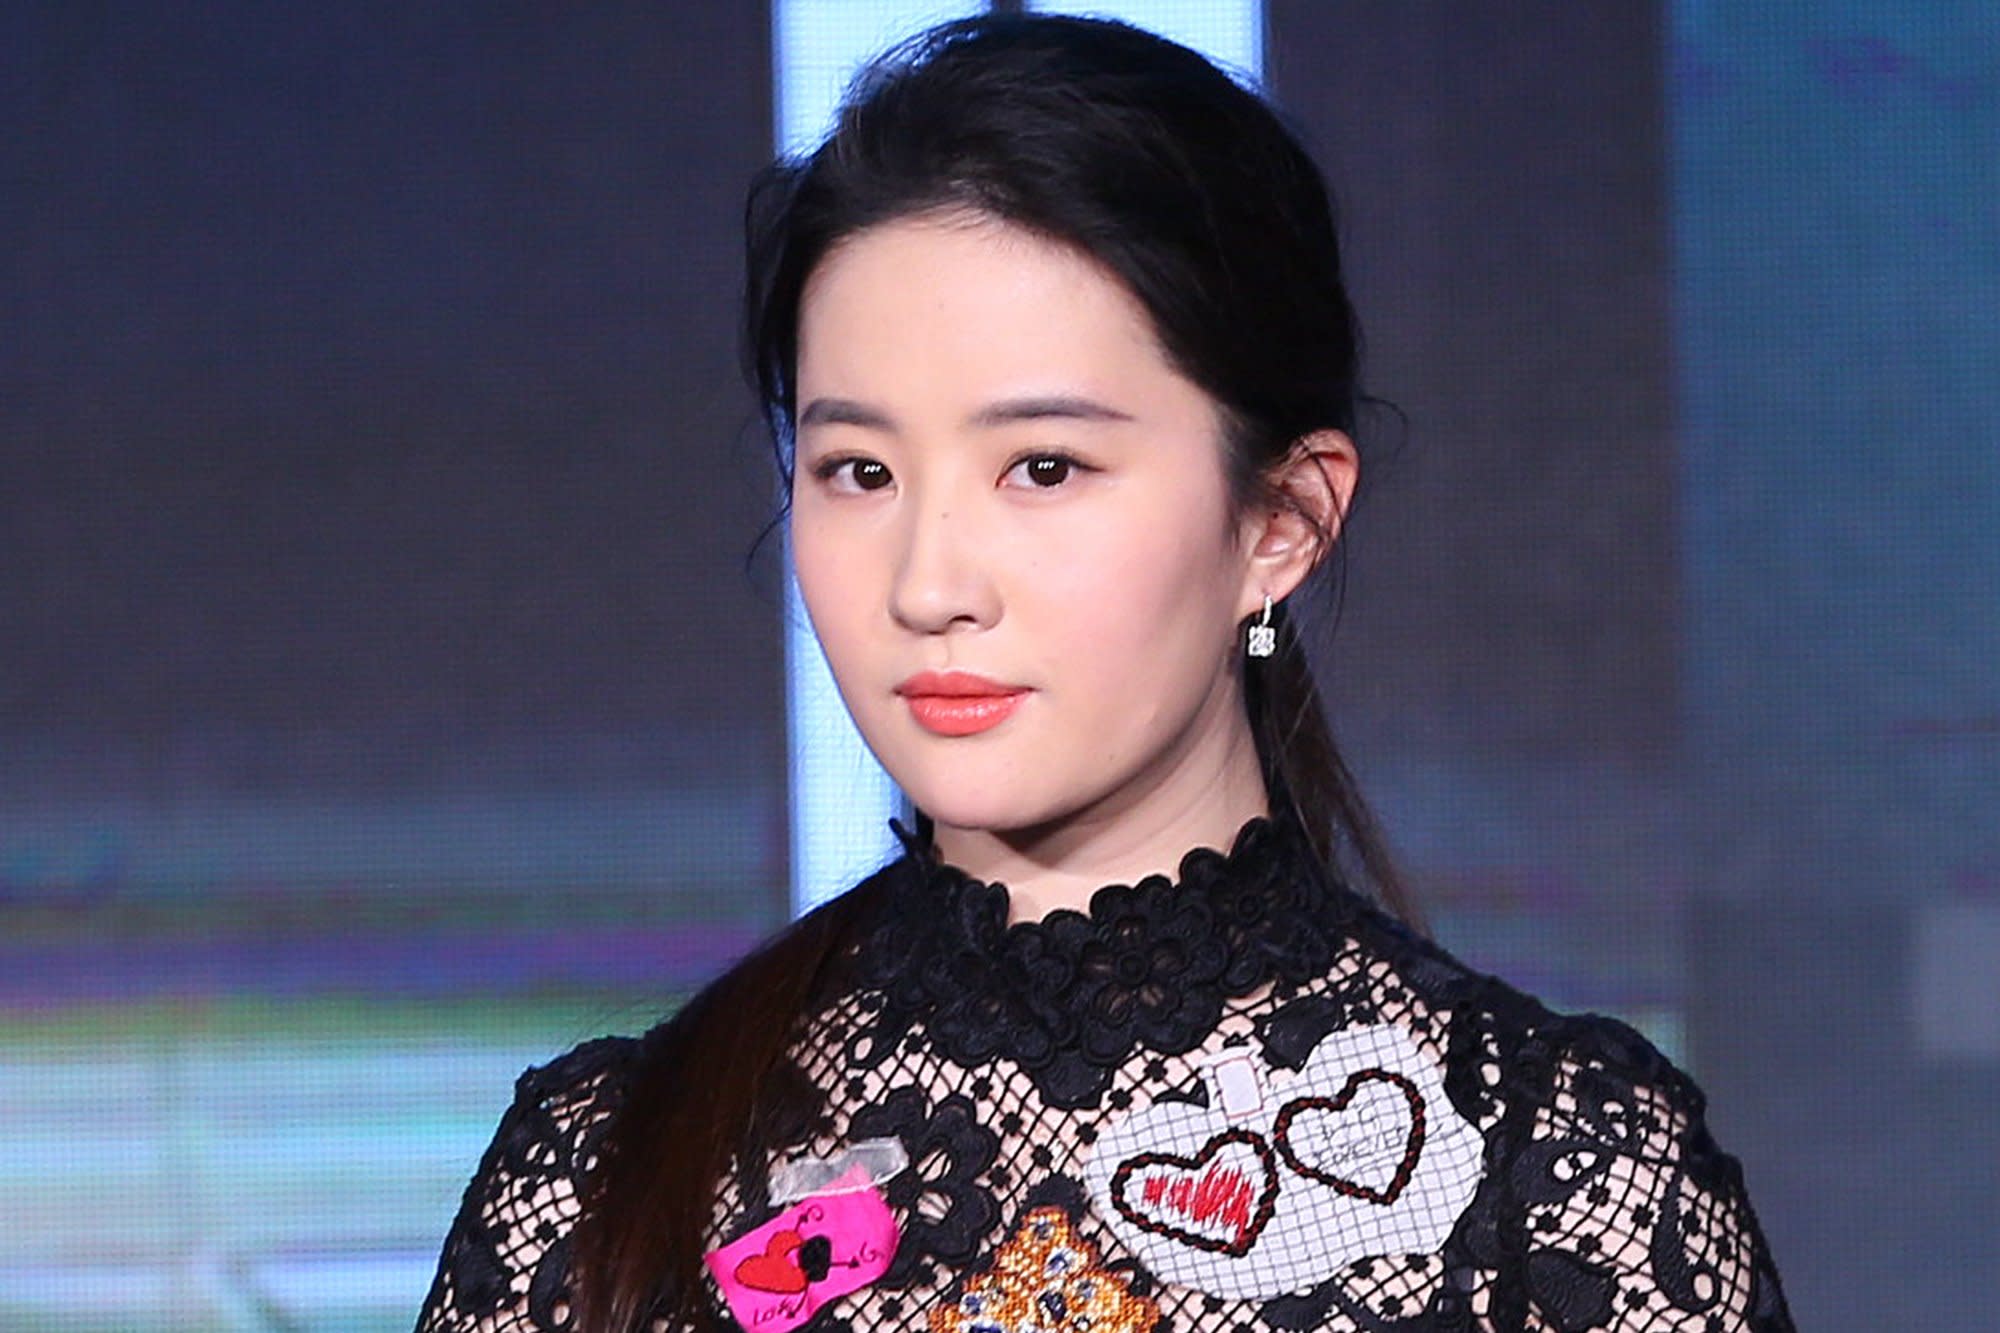 Everything You Should Know About Live Action Mulan Star Liu Yifei